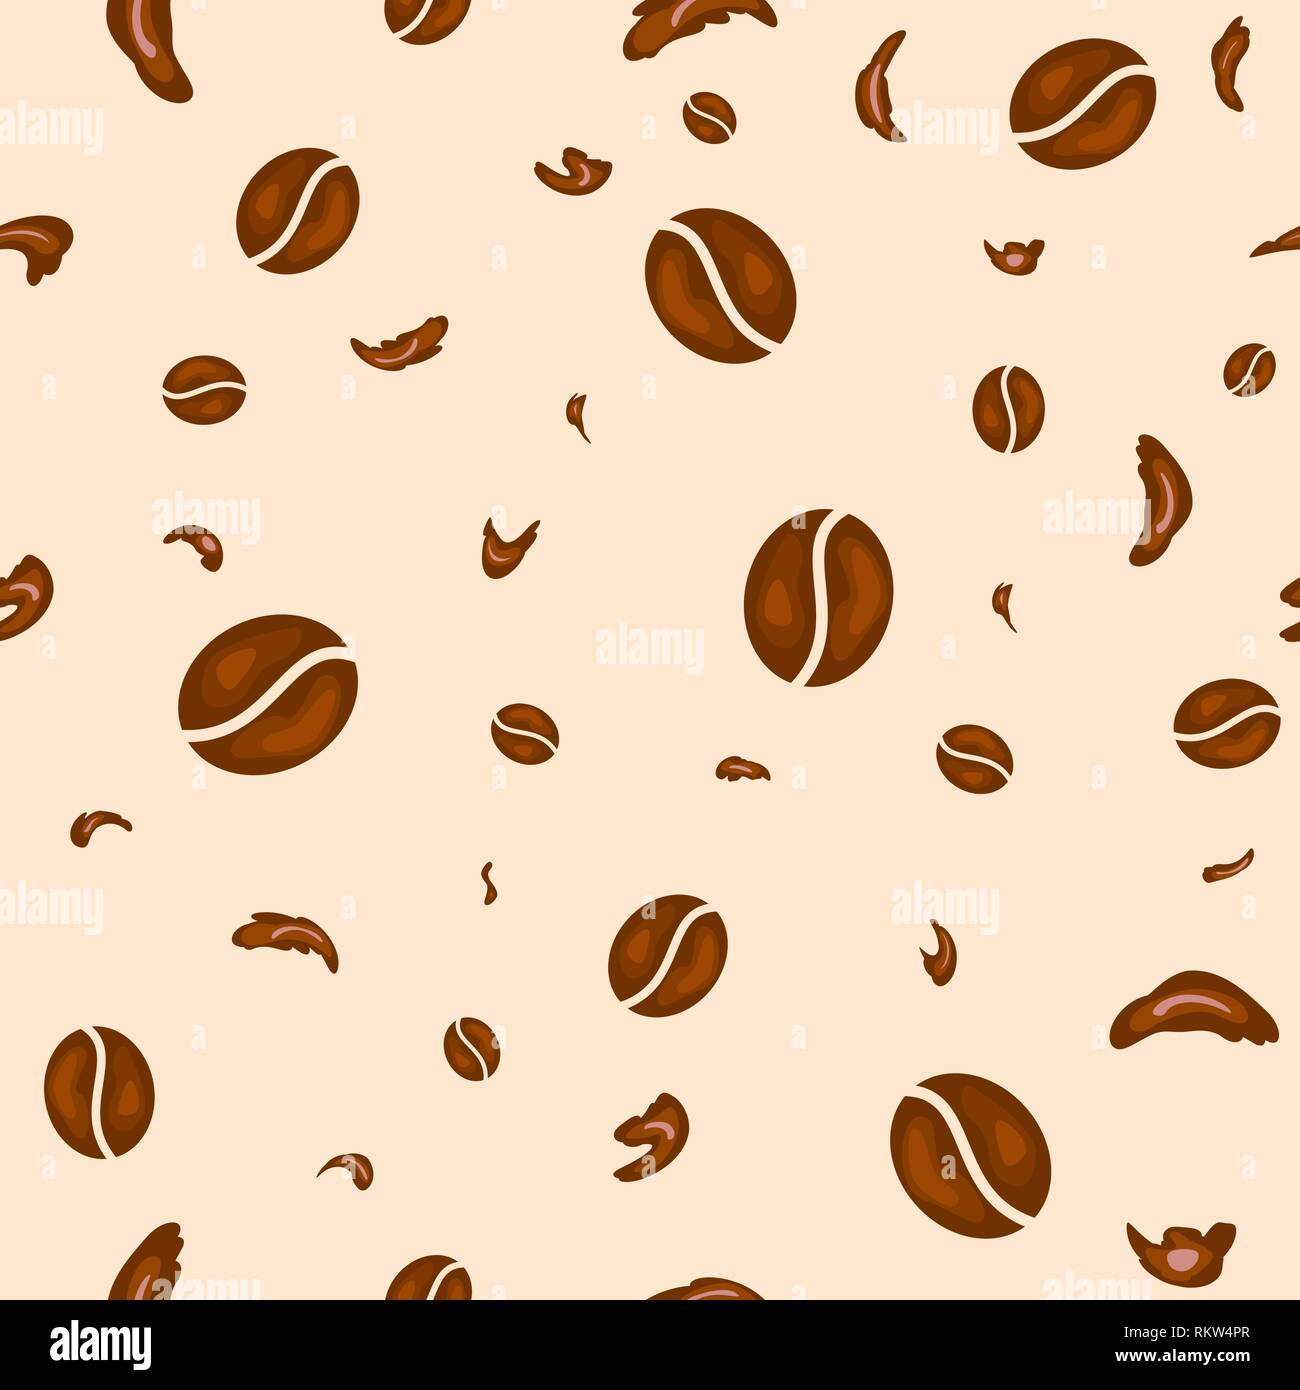 Seamless background. Coffee beans and chocolate particles on a light beige background. Abstract background of coffee beans and chocolate chips. Stock Vector